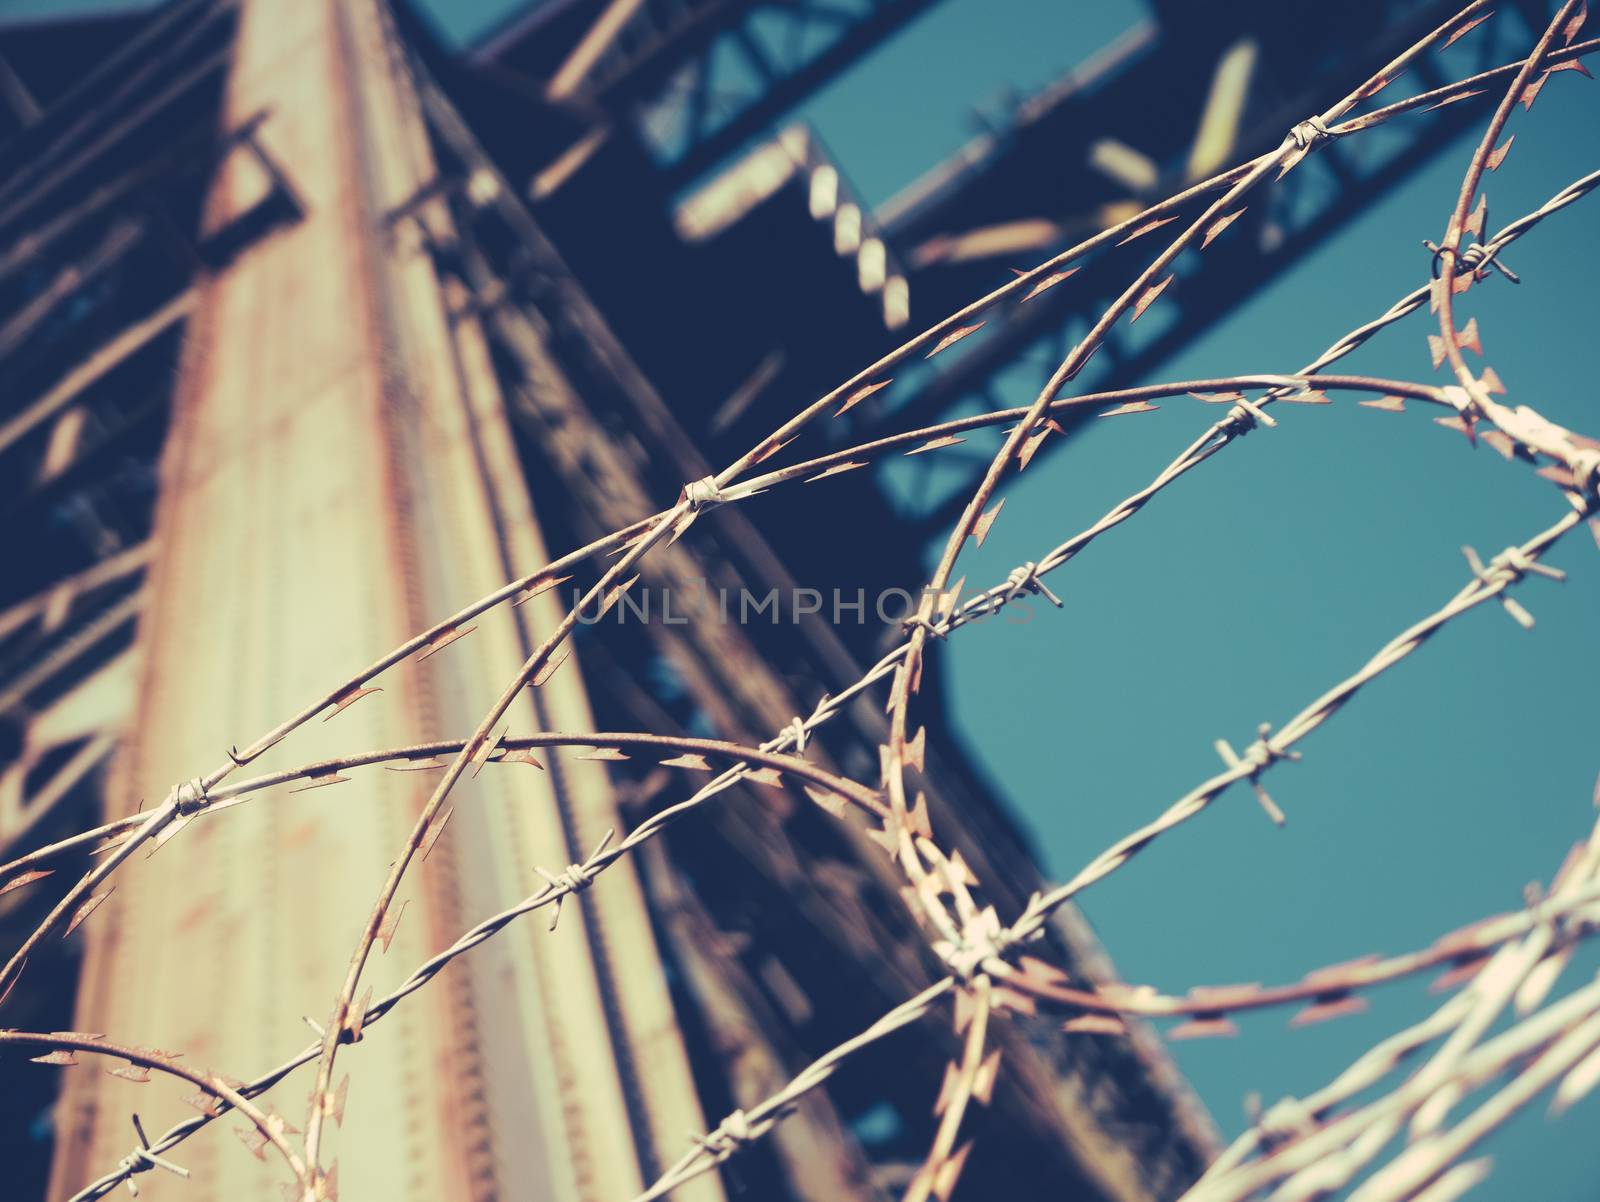 Industrial Concept Image Of Barbed Wire Around A Shipbuilding Crane